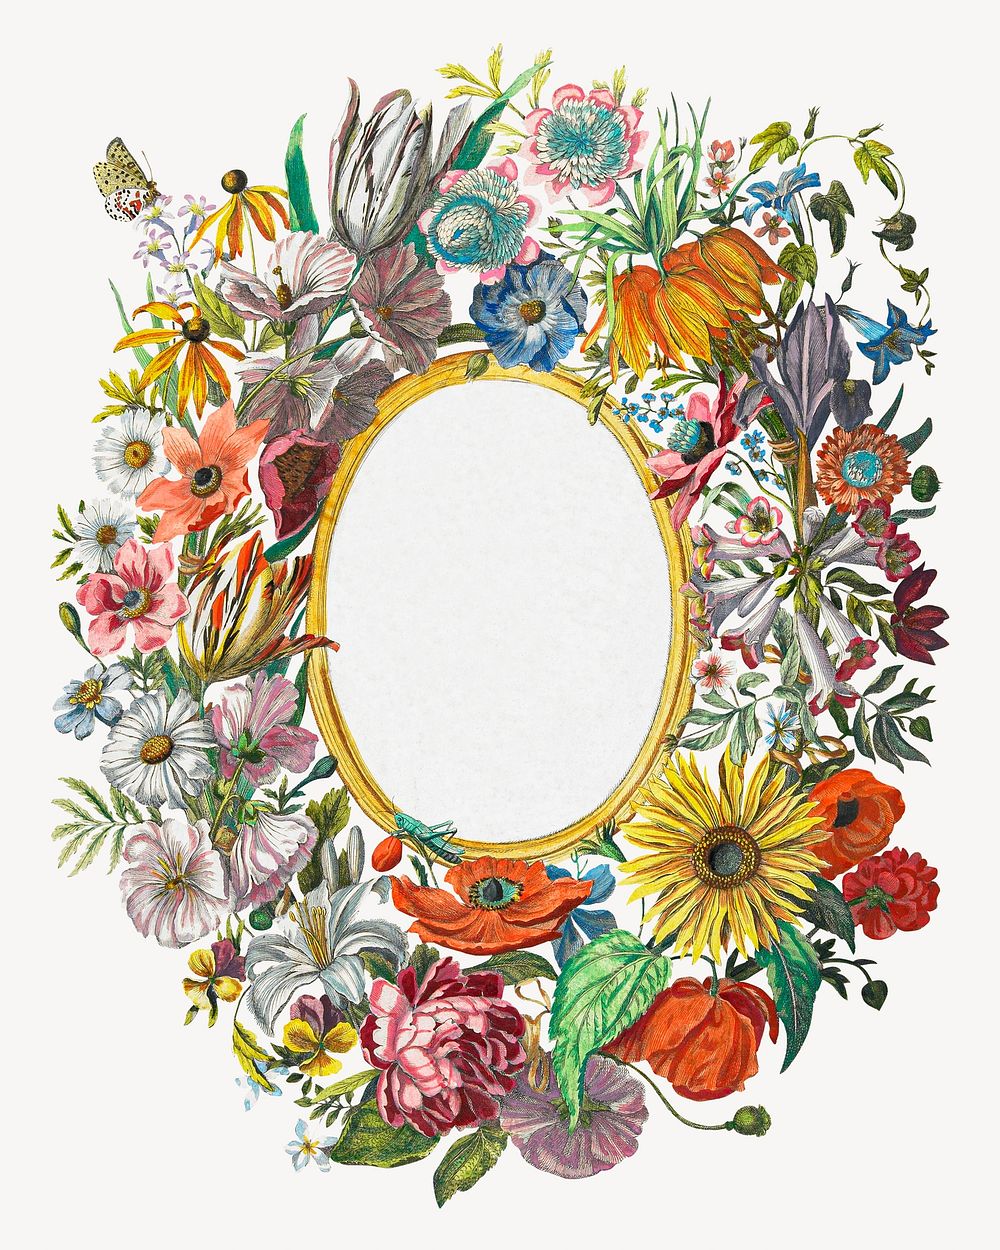 Vintage floral frame chromolithograph art. Remixed by rawpixel. 